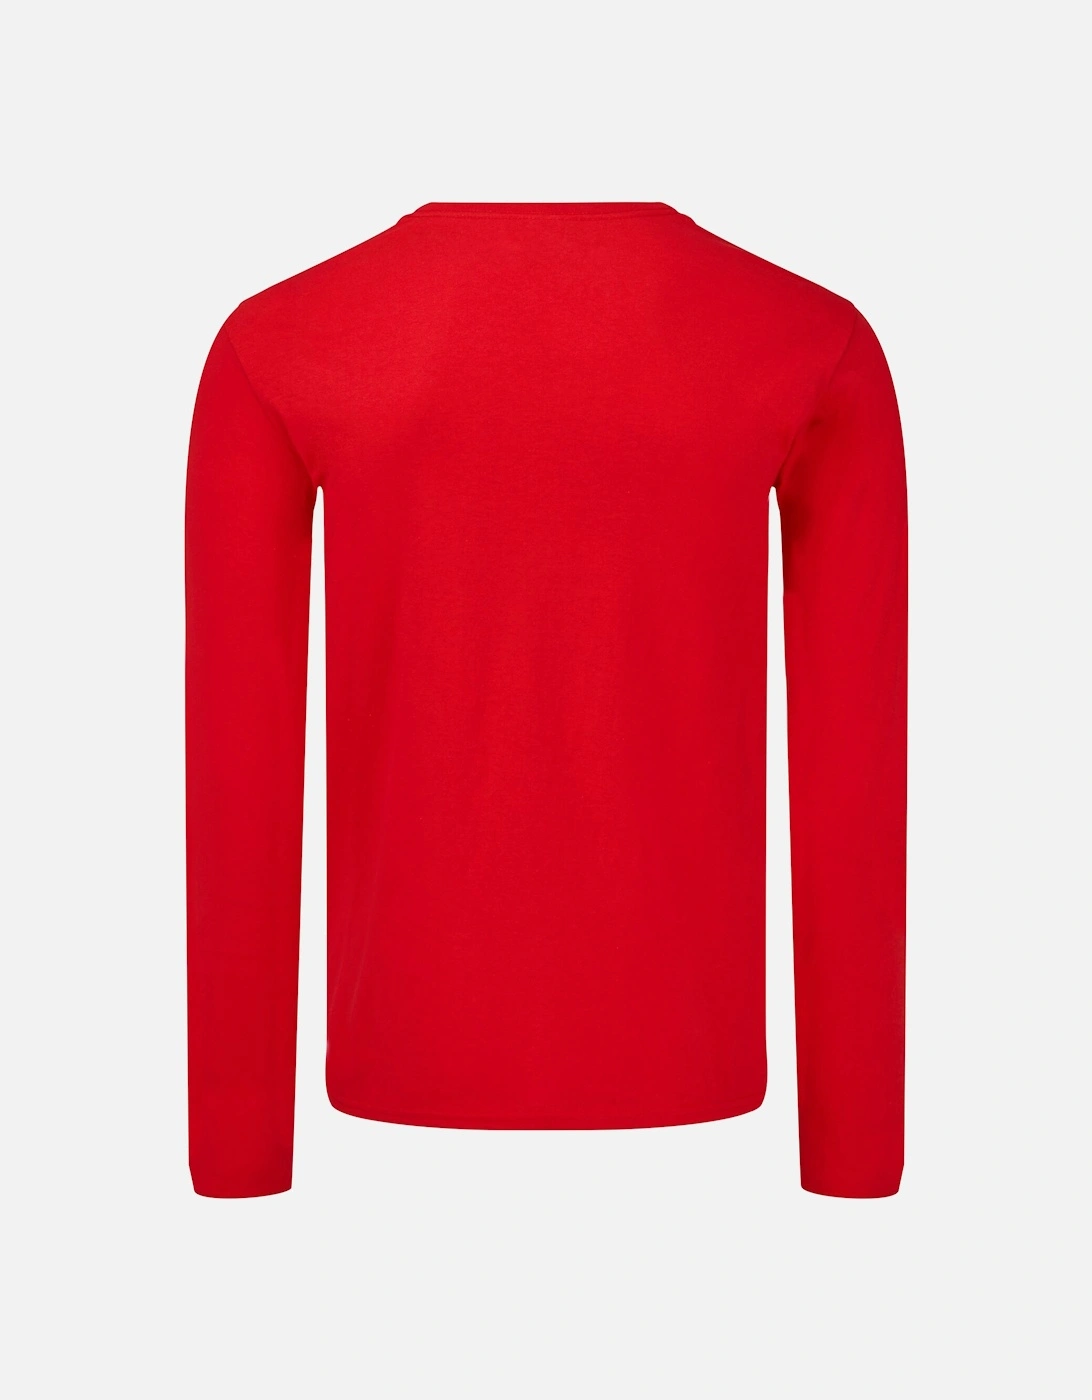 Mens Iconic Long-Sleeved T-Shirt